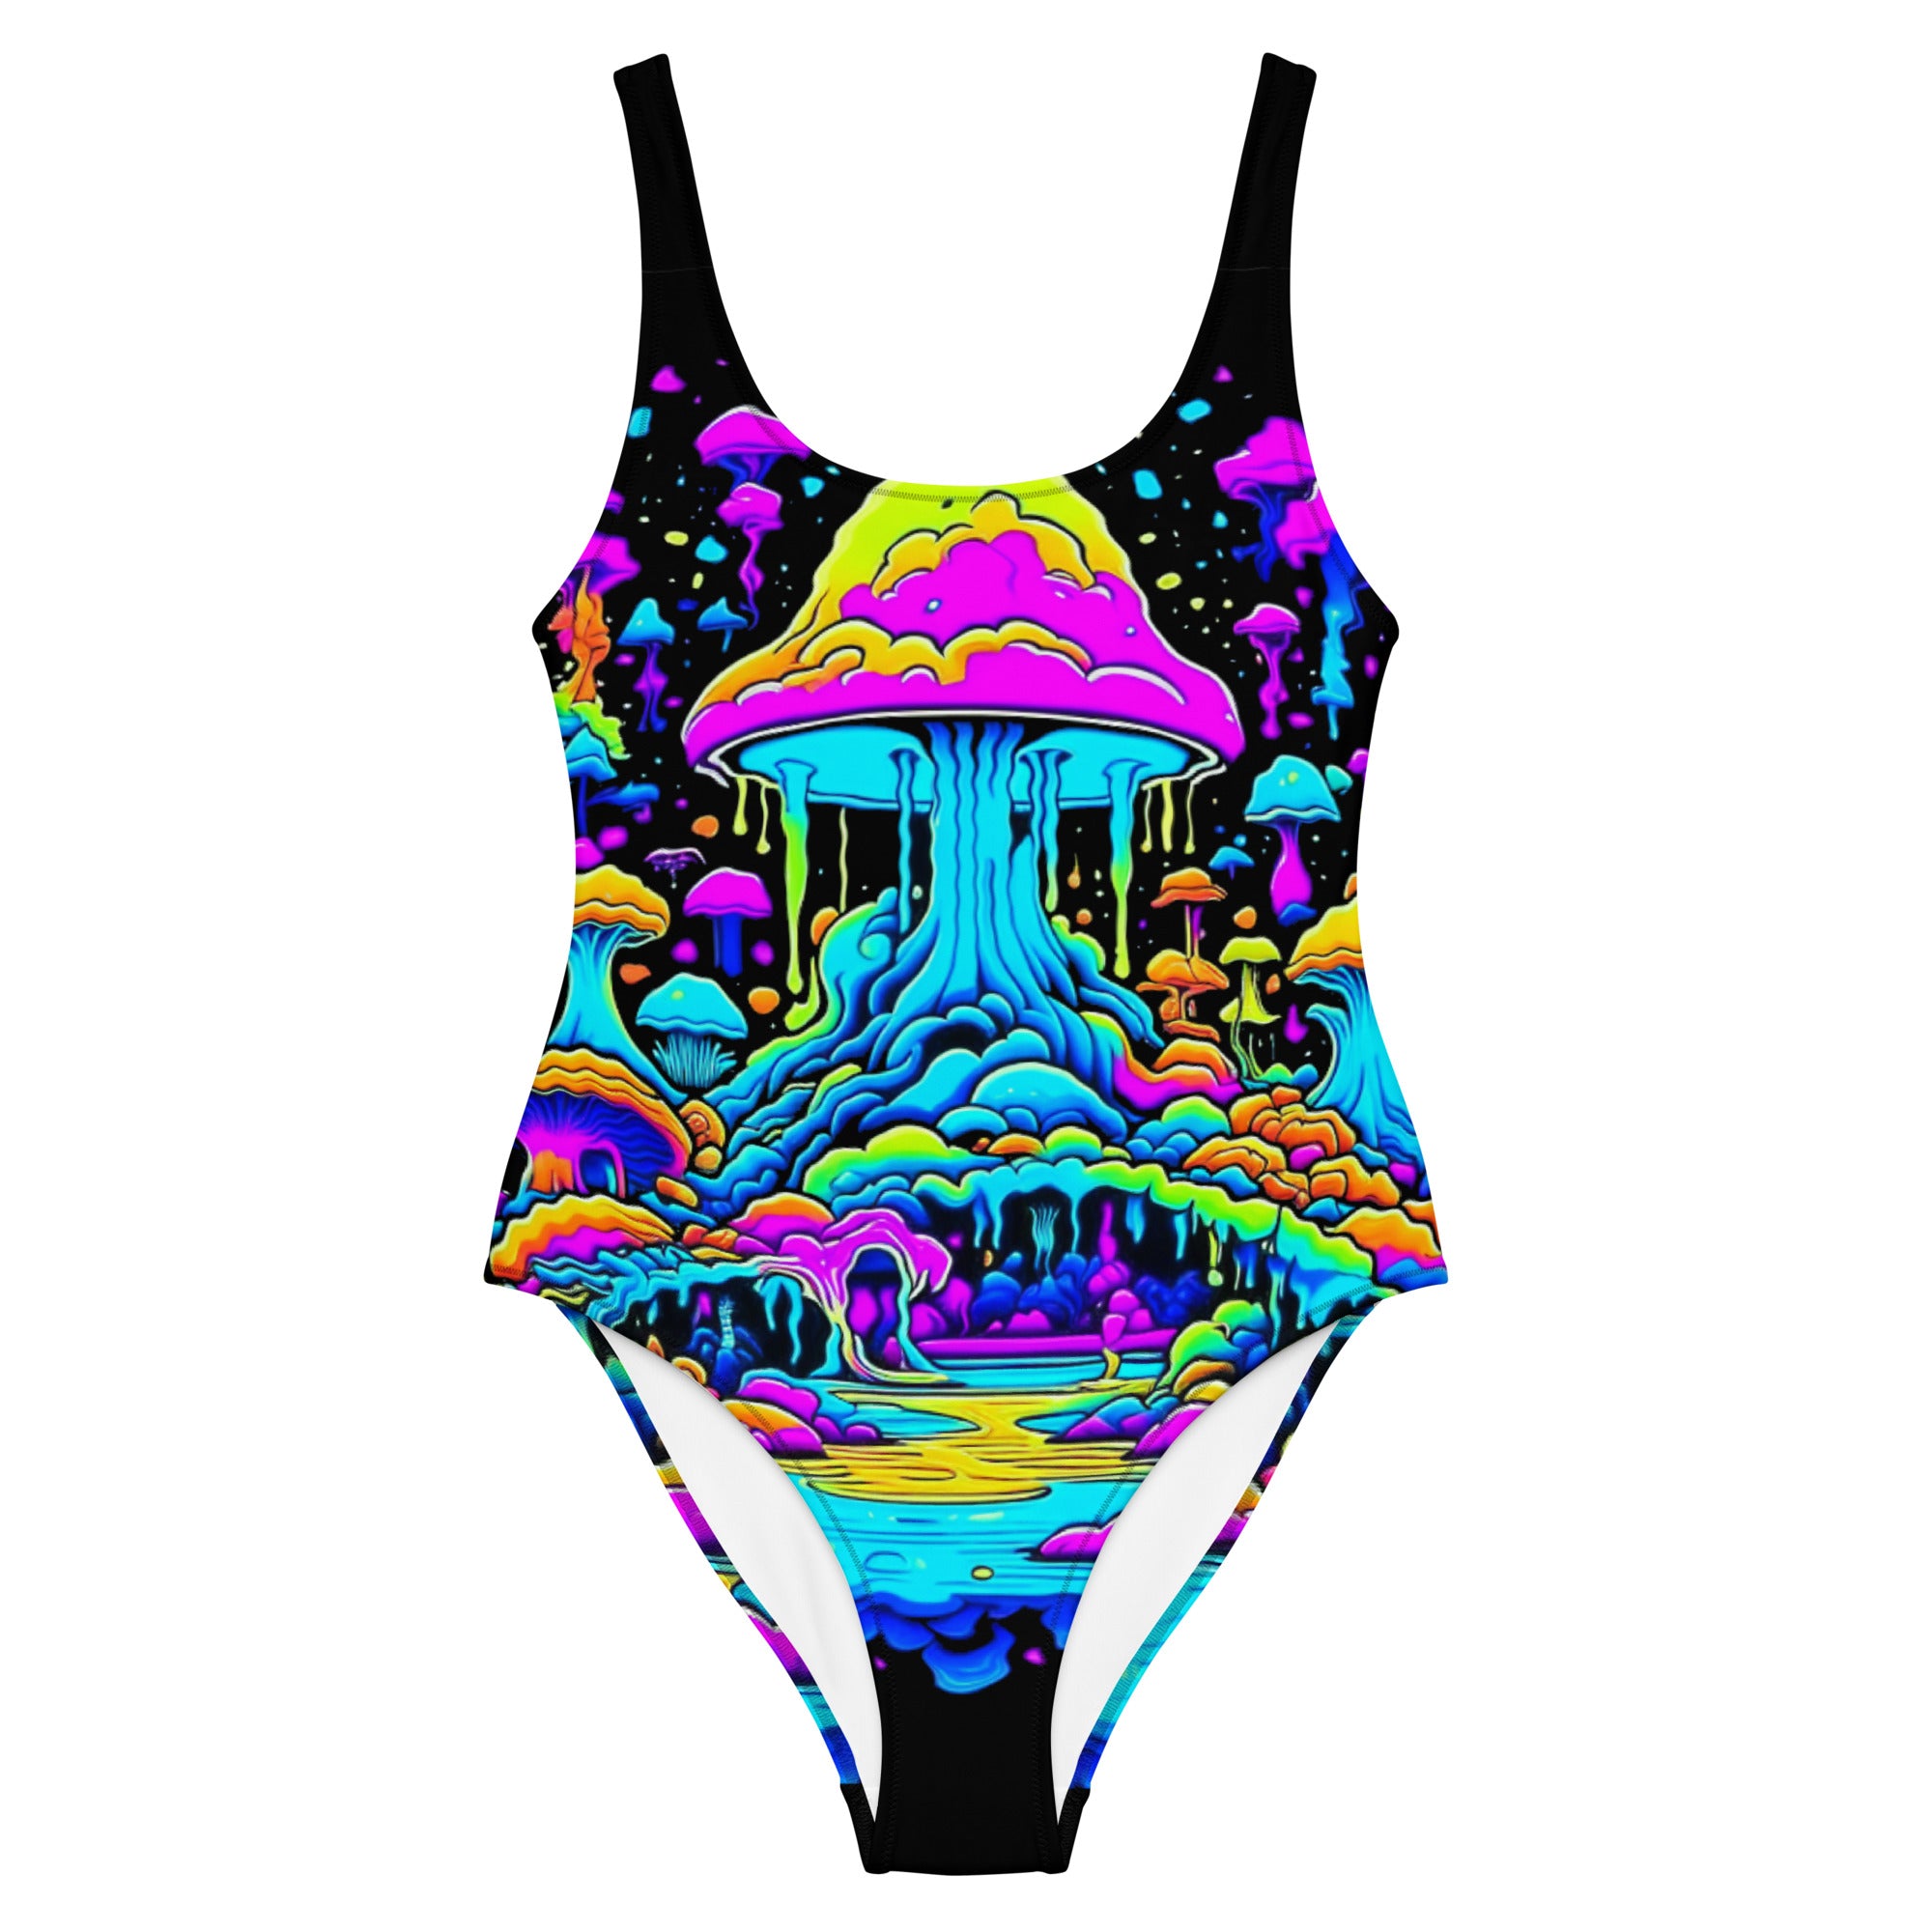 Experience the psychedelic vibes of our Wonderland Bodysuit! Our one-of-a-kind design features a trippy, vibrant pattern of mushrooms, perfect for rocking out at raves and music festivals. Don't miss out on this unique and eye-catching piece!